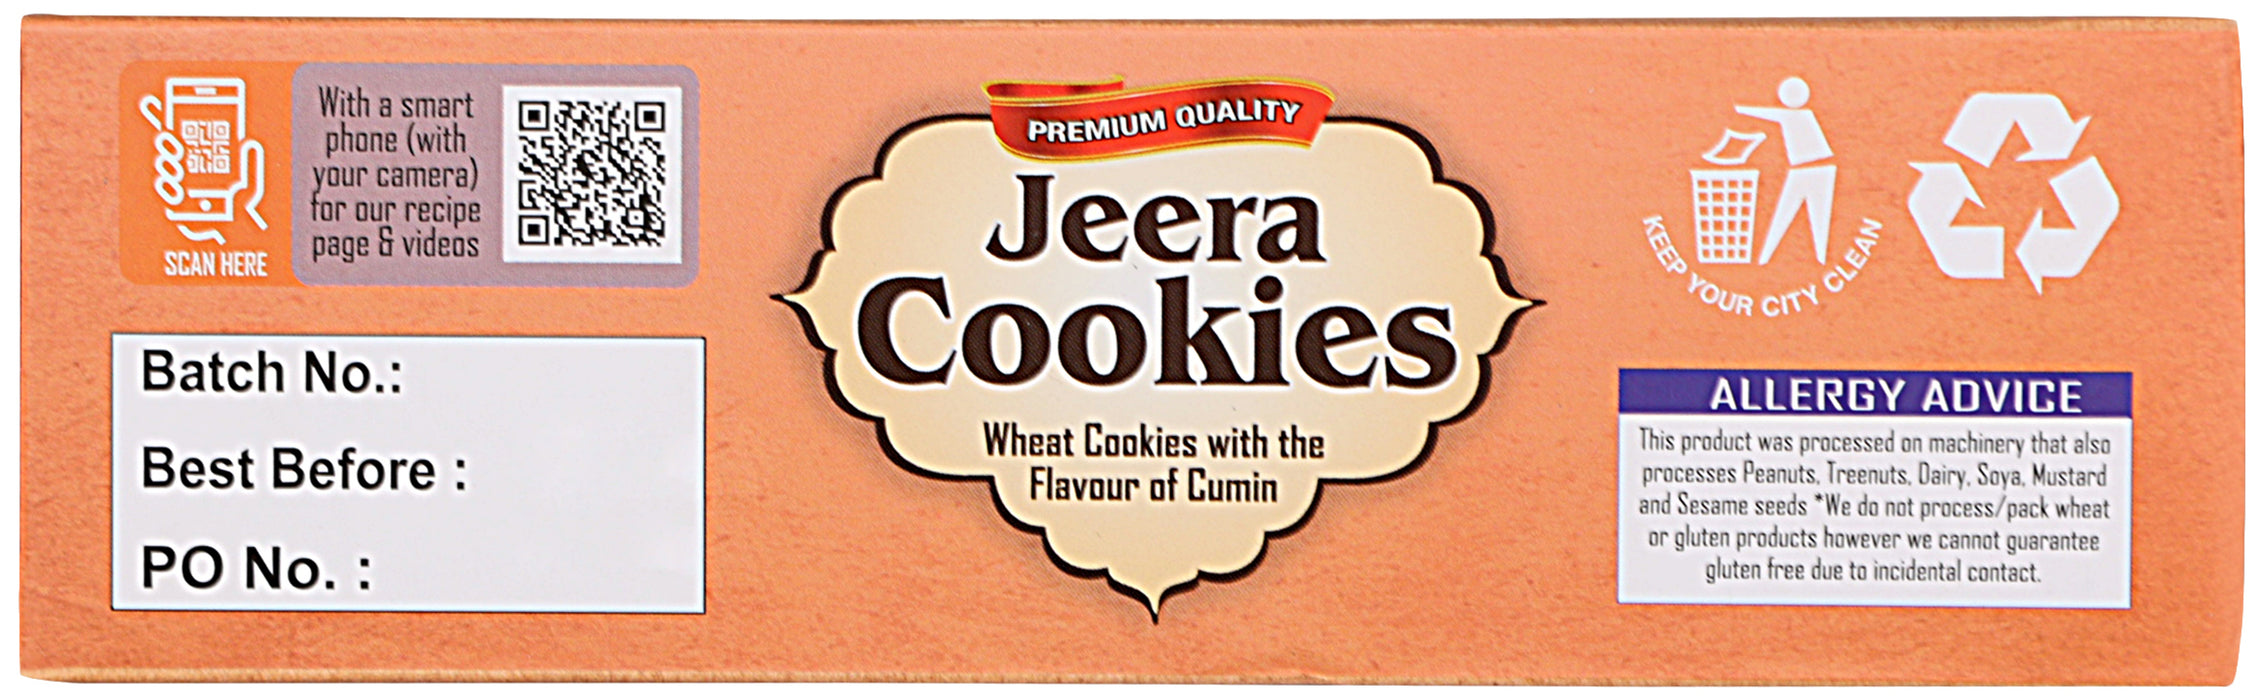 Rani Jeera Cookies (Wheat Cookies with the Flavor of Cumin) 14oz (400g) Pack of 3+1 FREE, Premium Quality Indian Cookies ~ All Natural | Vegan | Non-GMO | Indian Origin